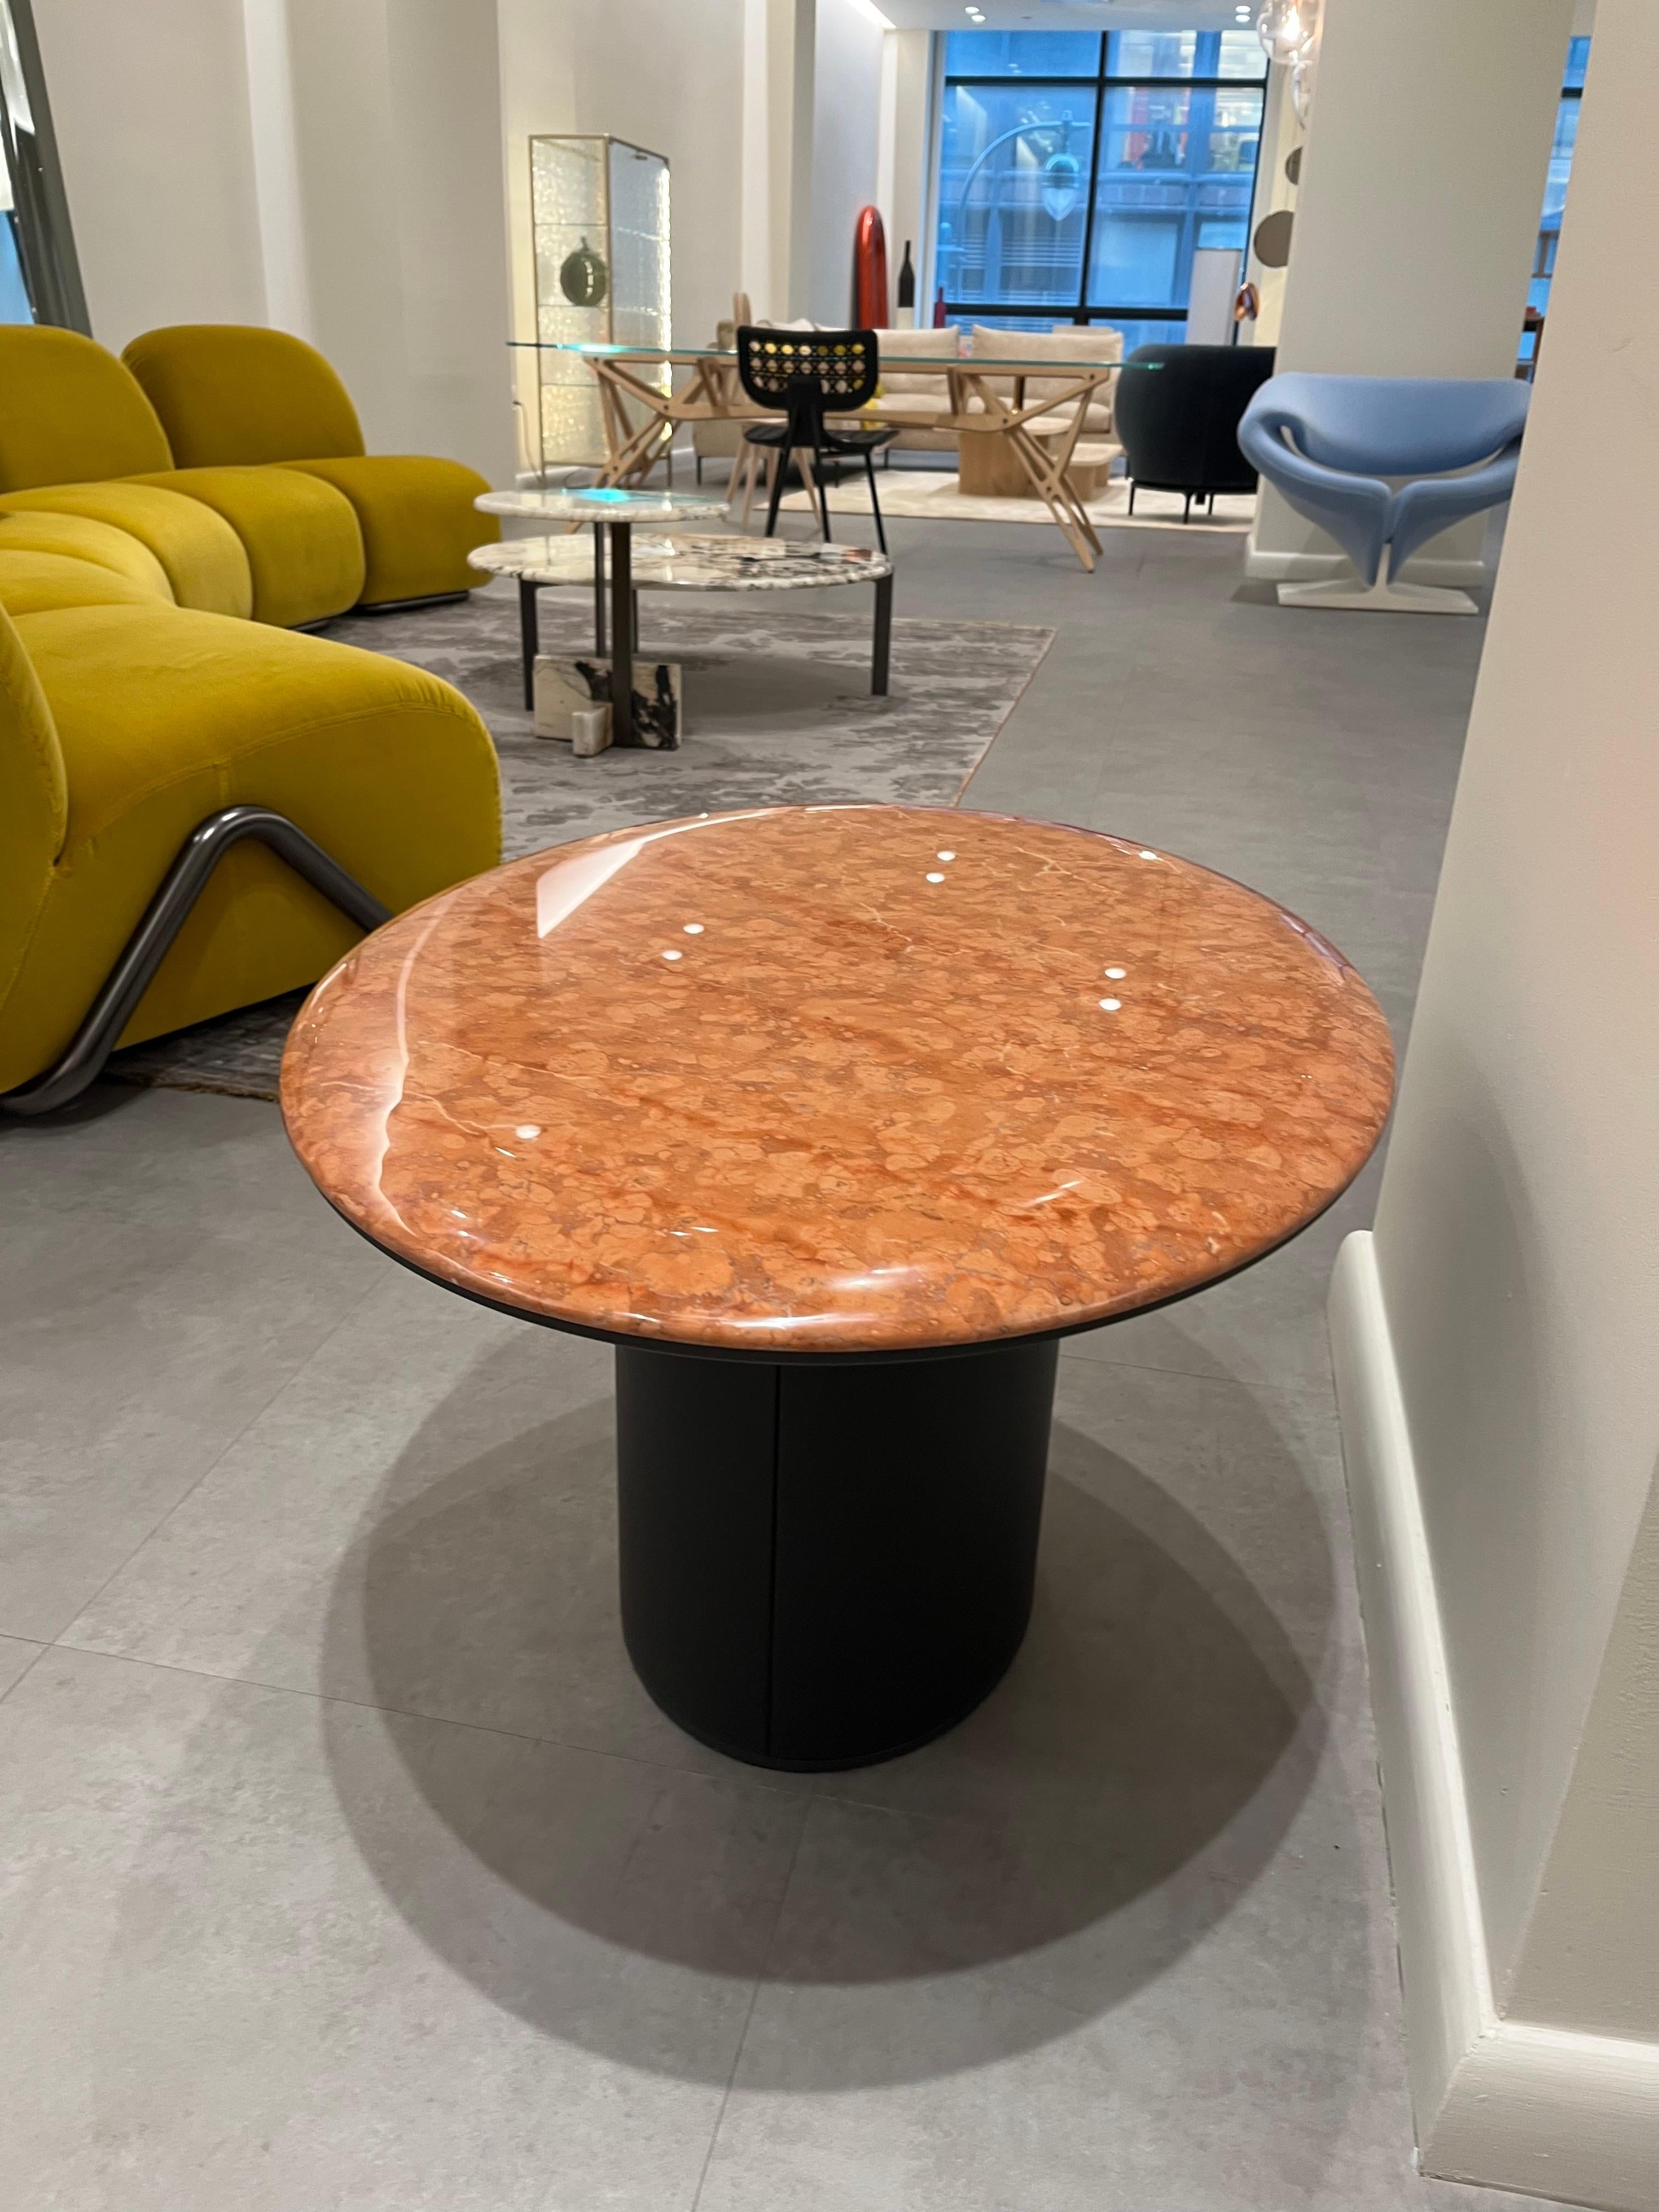 1)Antilles Giallo Table 52 x 40 h = 45 cm
Marble Giallo Reale
Base: leather covered Color black
Glides: felted glides

2)Antilles Rosso 76 x 60 h = 45 cm
Marble Rosso Asiago
Base: leather covered Color black
Glides: felted glides

At the time of the